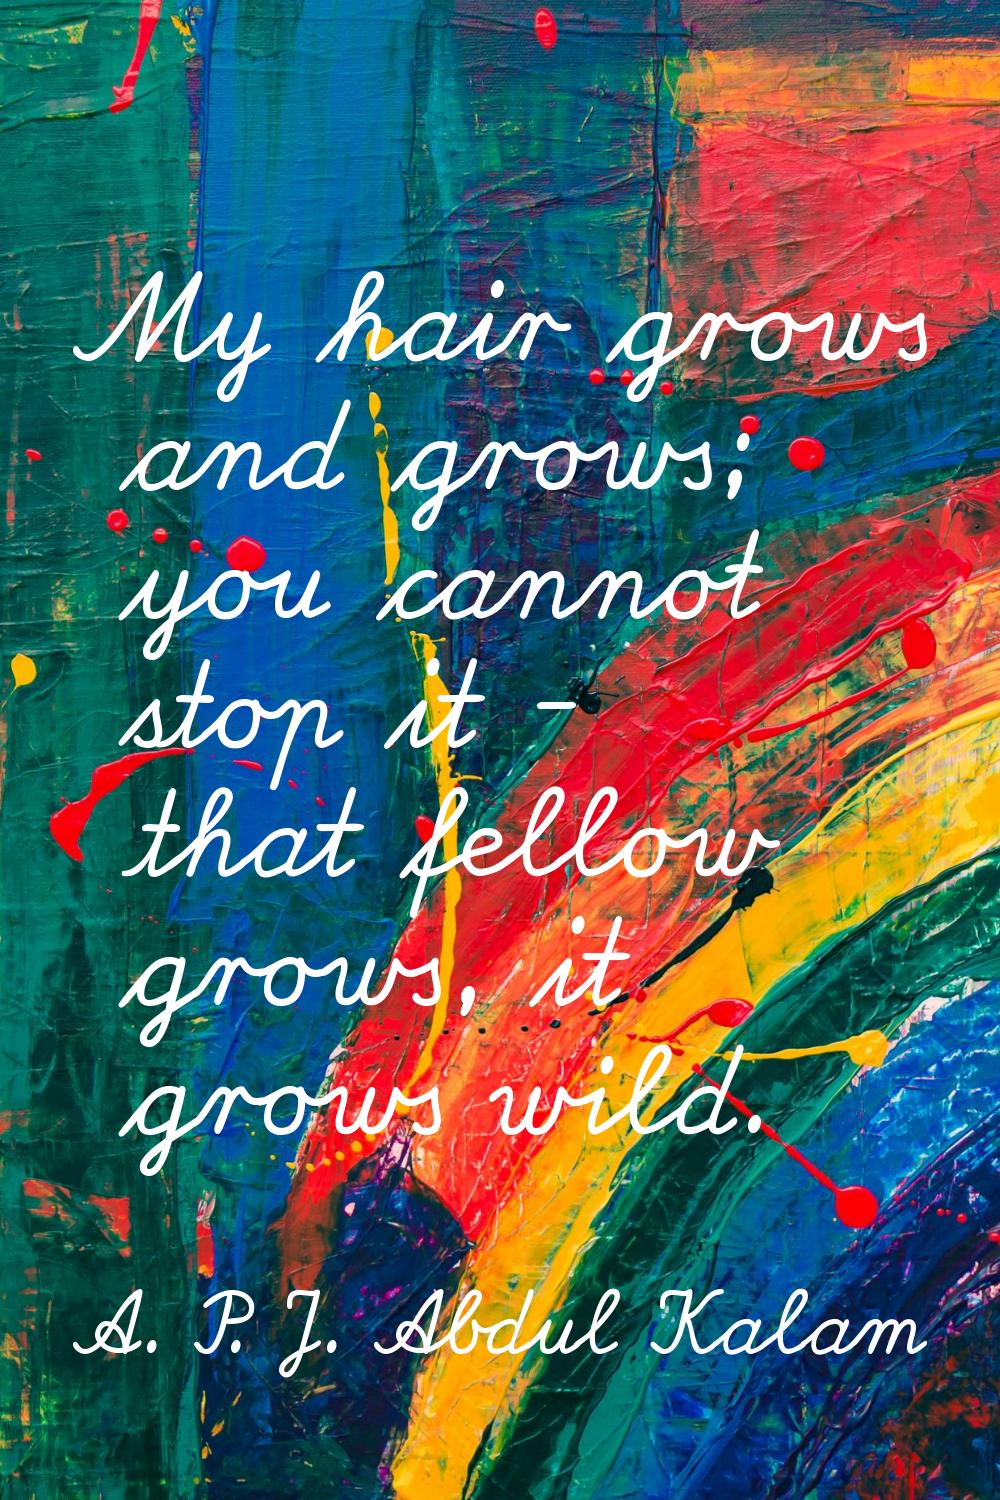 My hair grows and grows; you cannot stop it - that fellow grows, it grows wild.